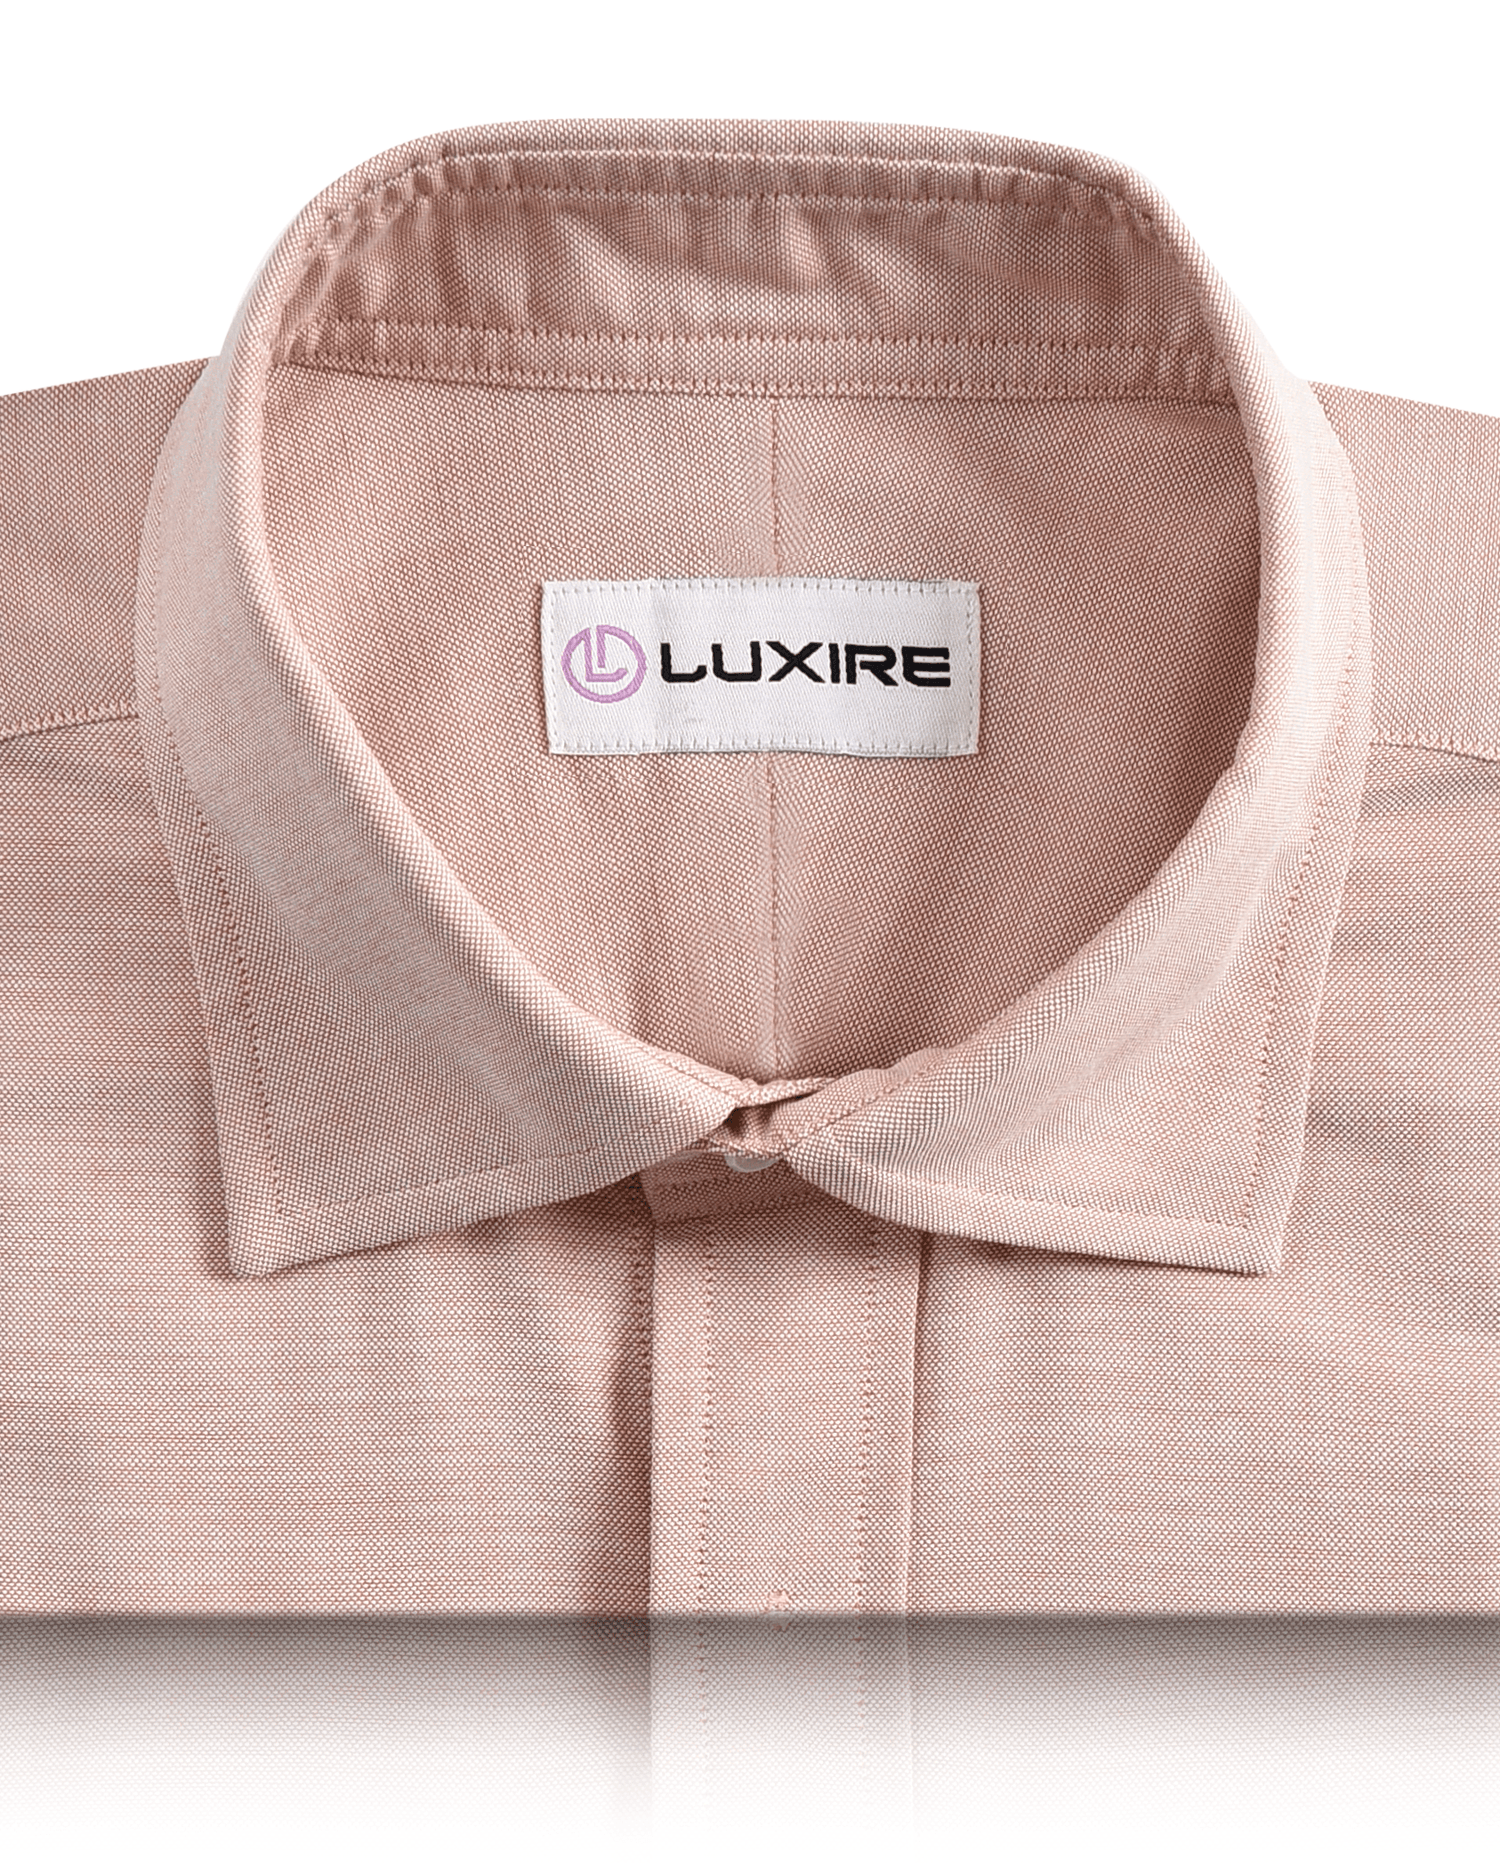 Collar of the custom oxford shirt for men by Luxire in orange